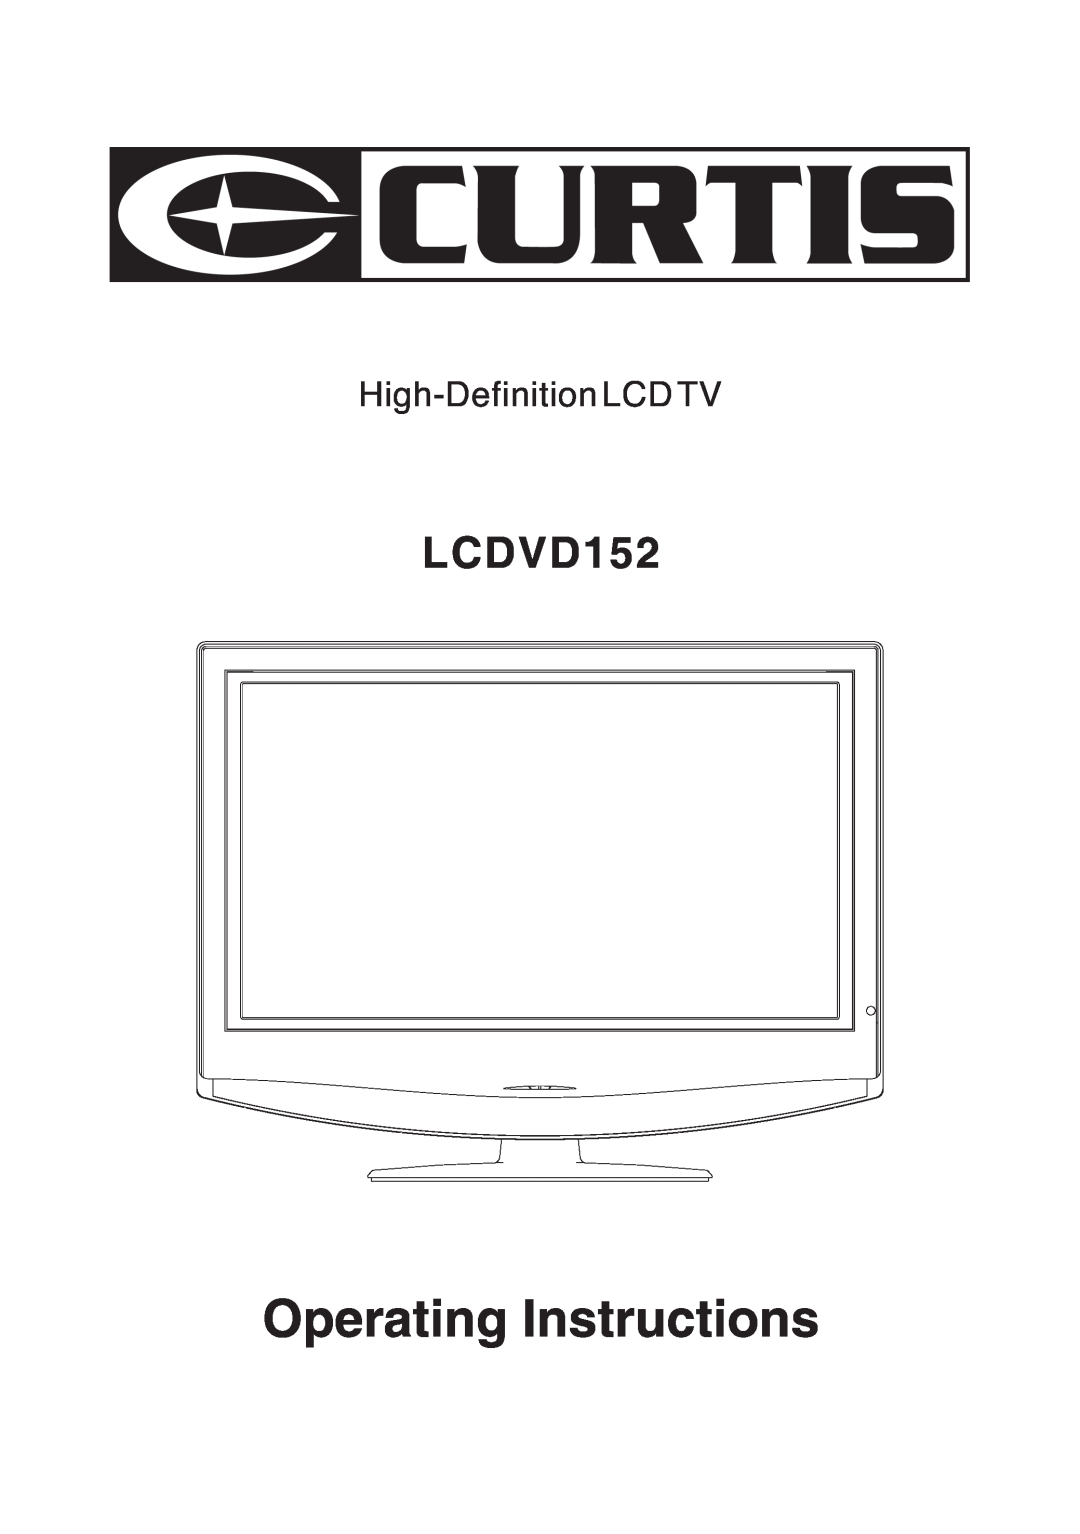 Curtis LCDVD152 manual Operating Instructions, High-DefinitionLCDTV 